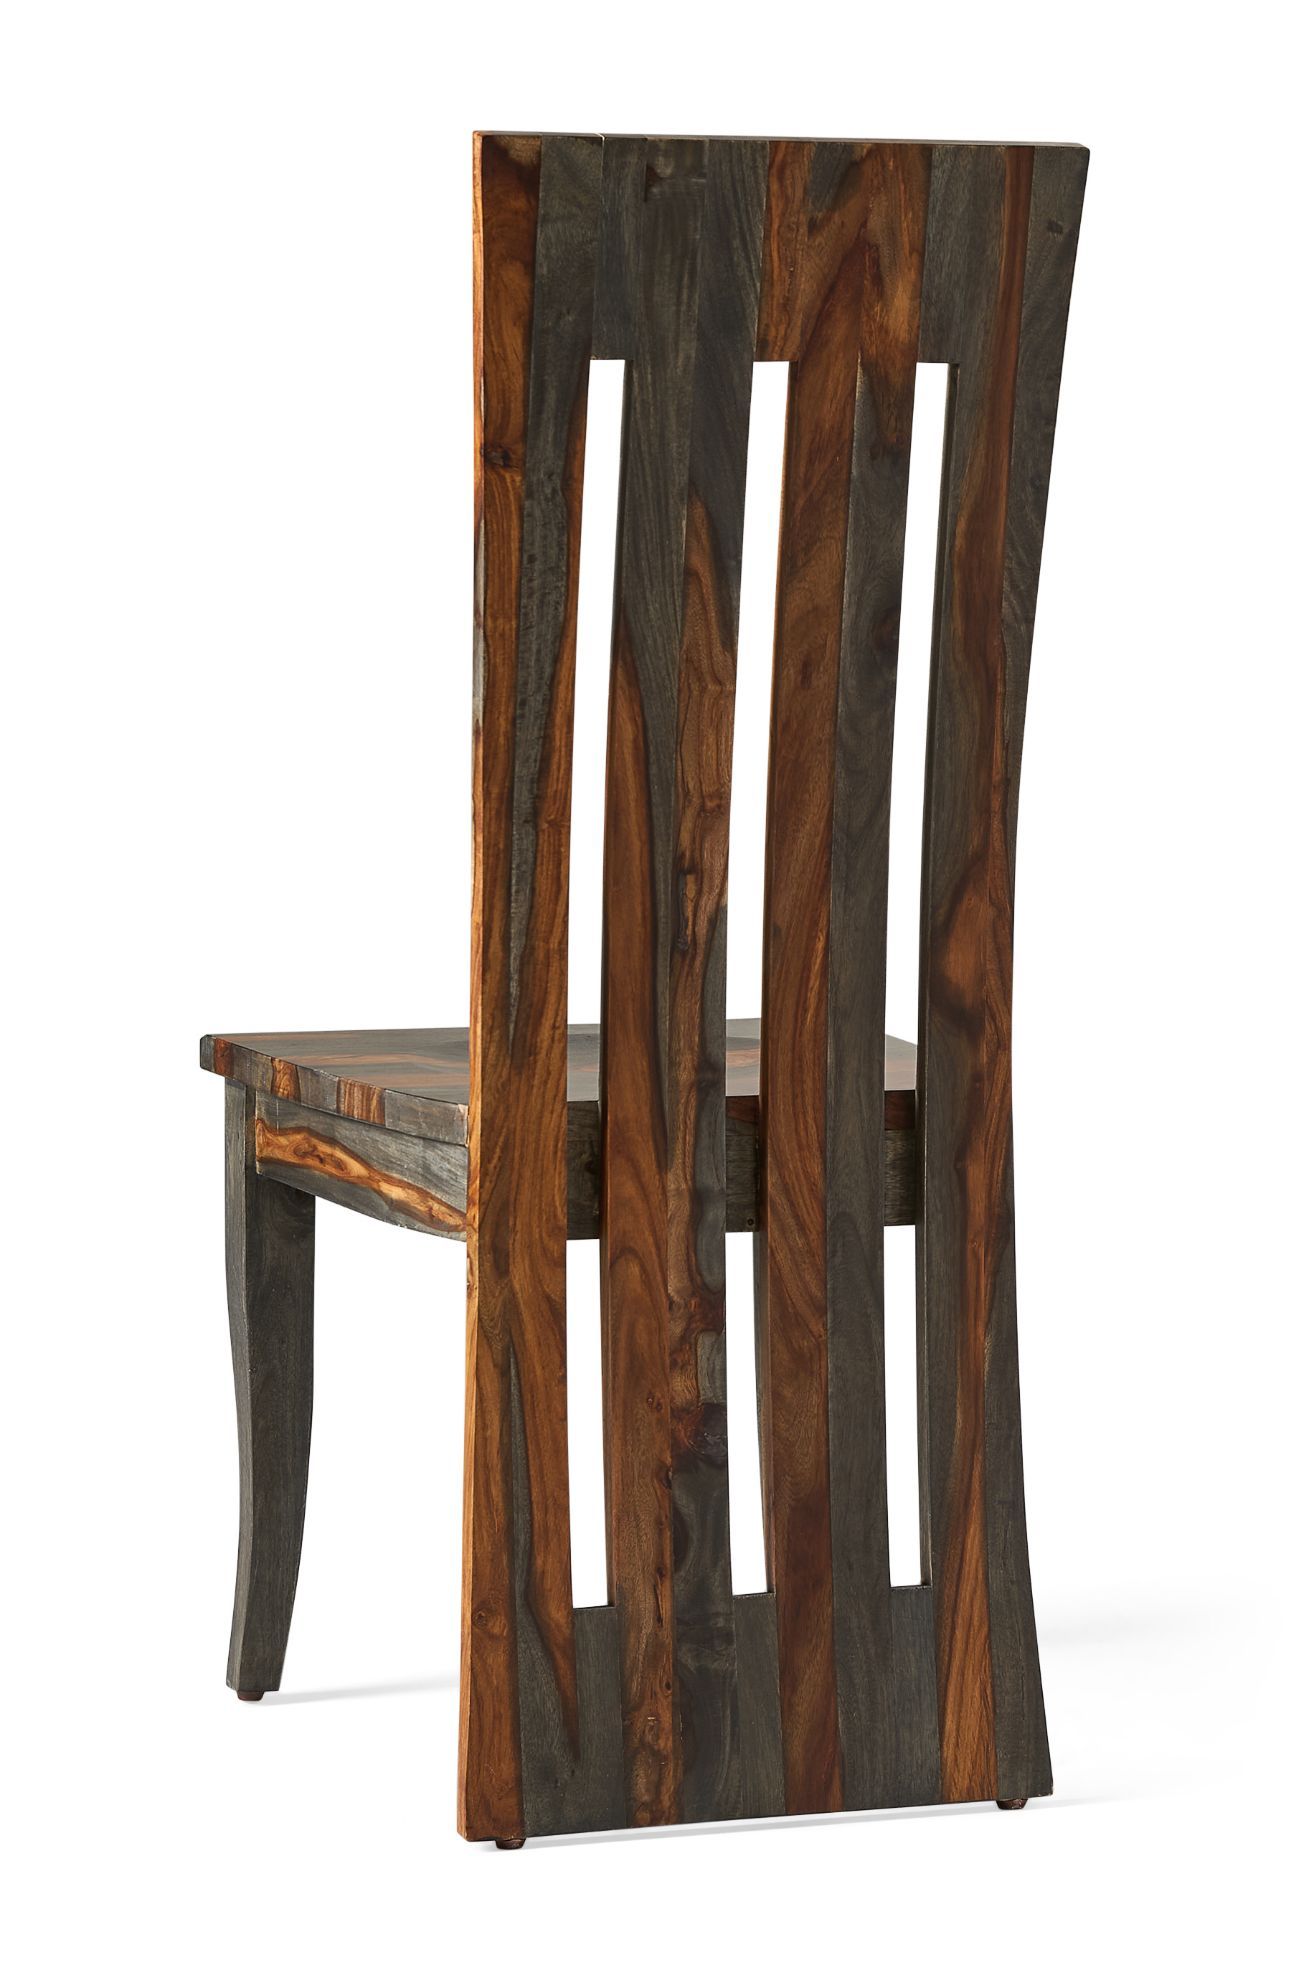 Picture of Sierra Dining Chair